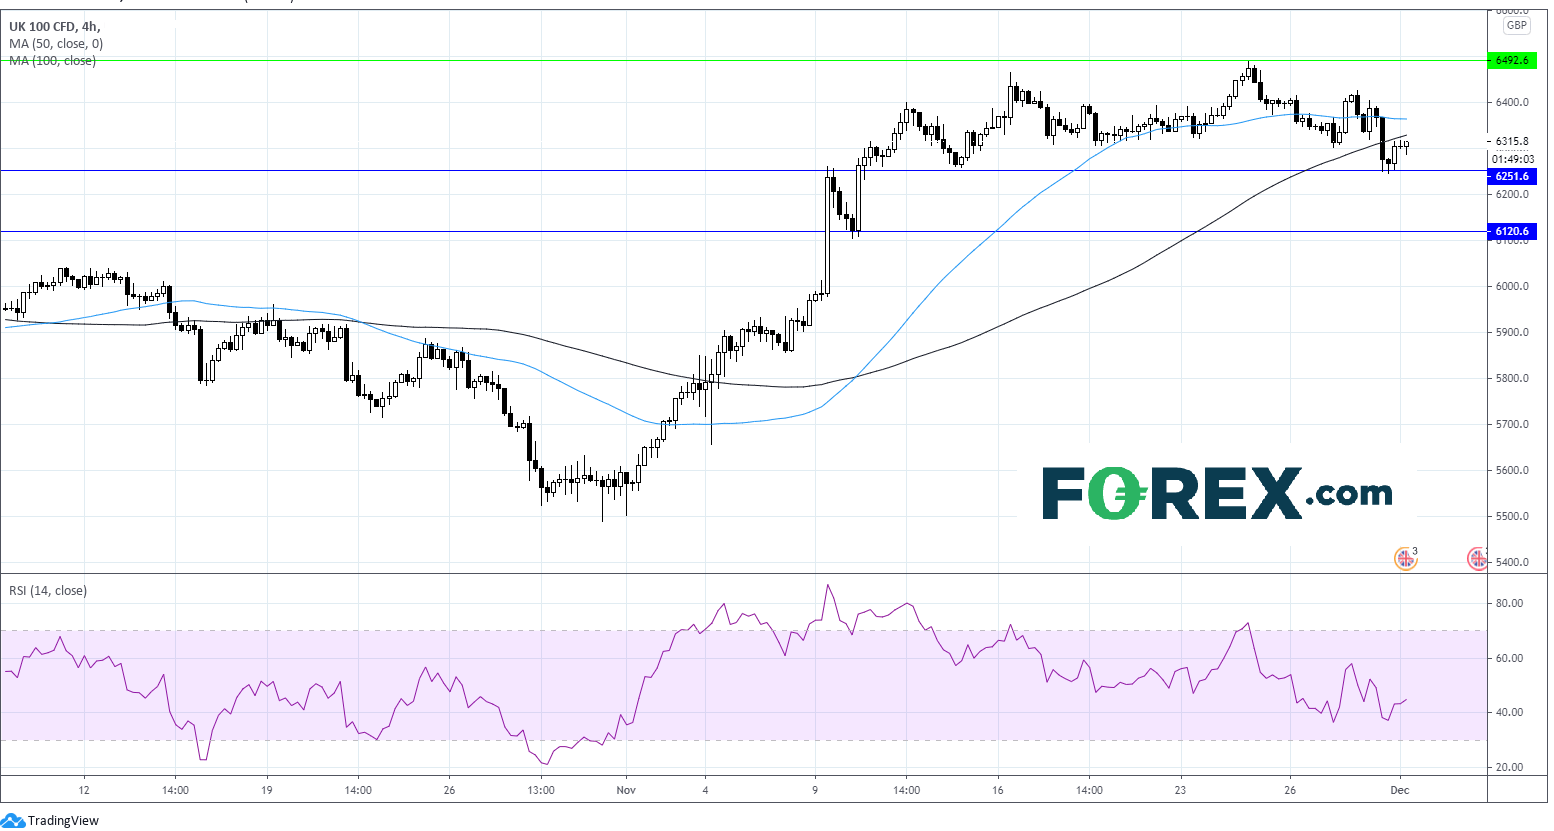 Chart analysis of the UK100 CFD over 4 hour period . Published in December 2020 by FOREX.com